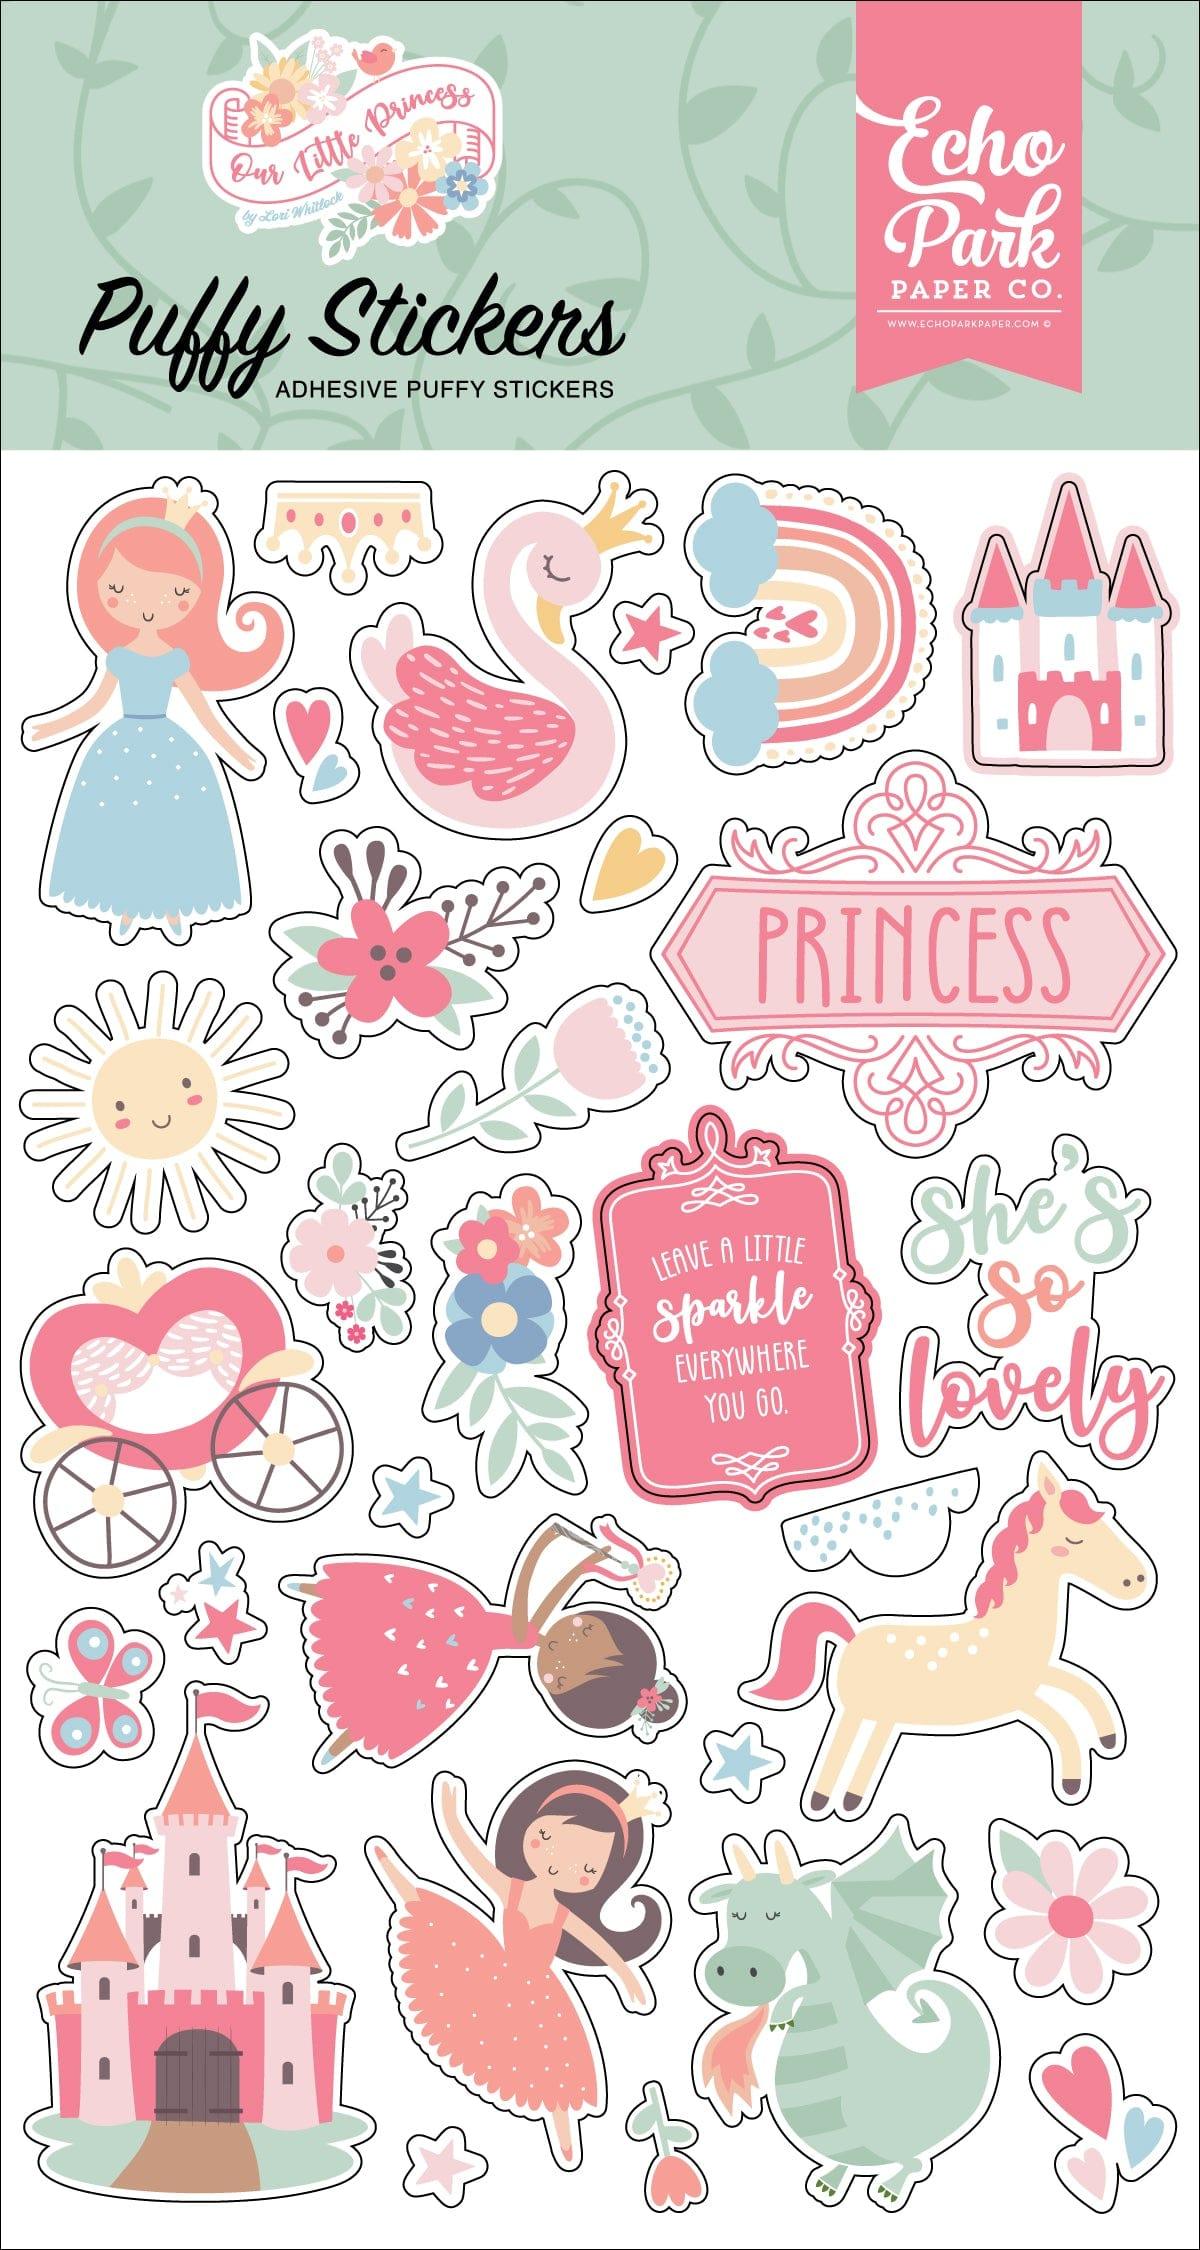 Our Little Princess Collection 4 x 7 Puffy Stickers Scrapbook Embellishments by Echo Park Paper - Scrapbook Supply Companies